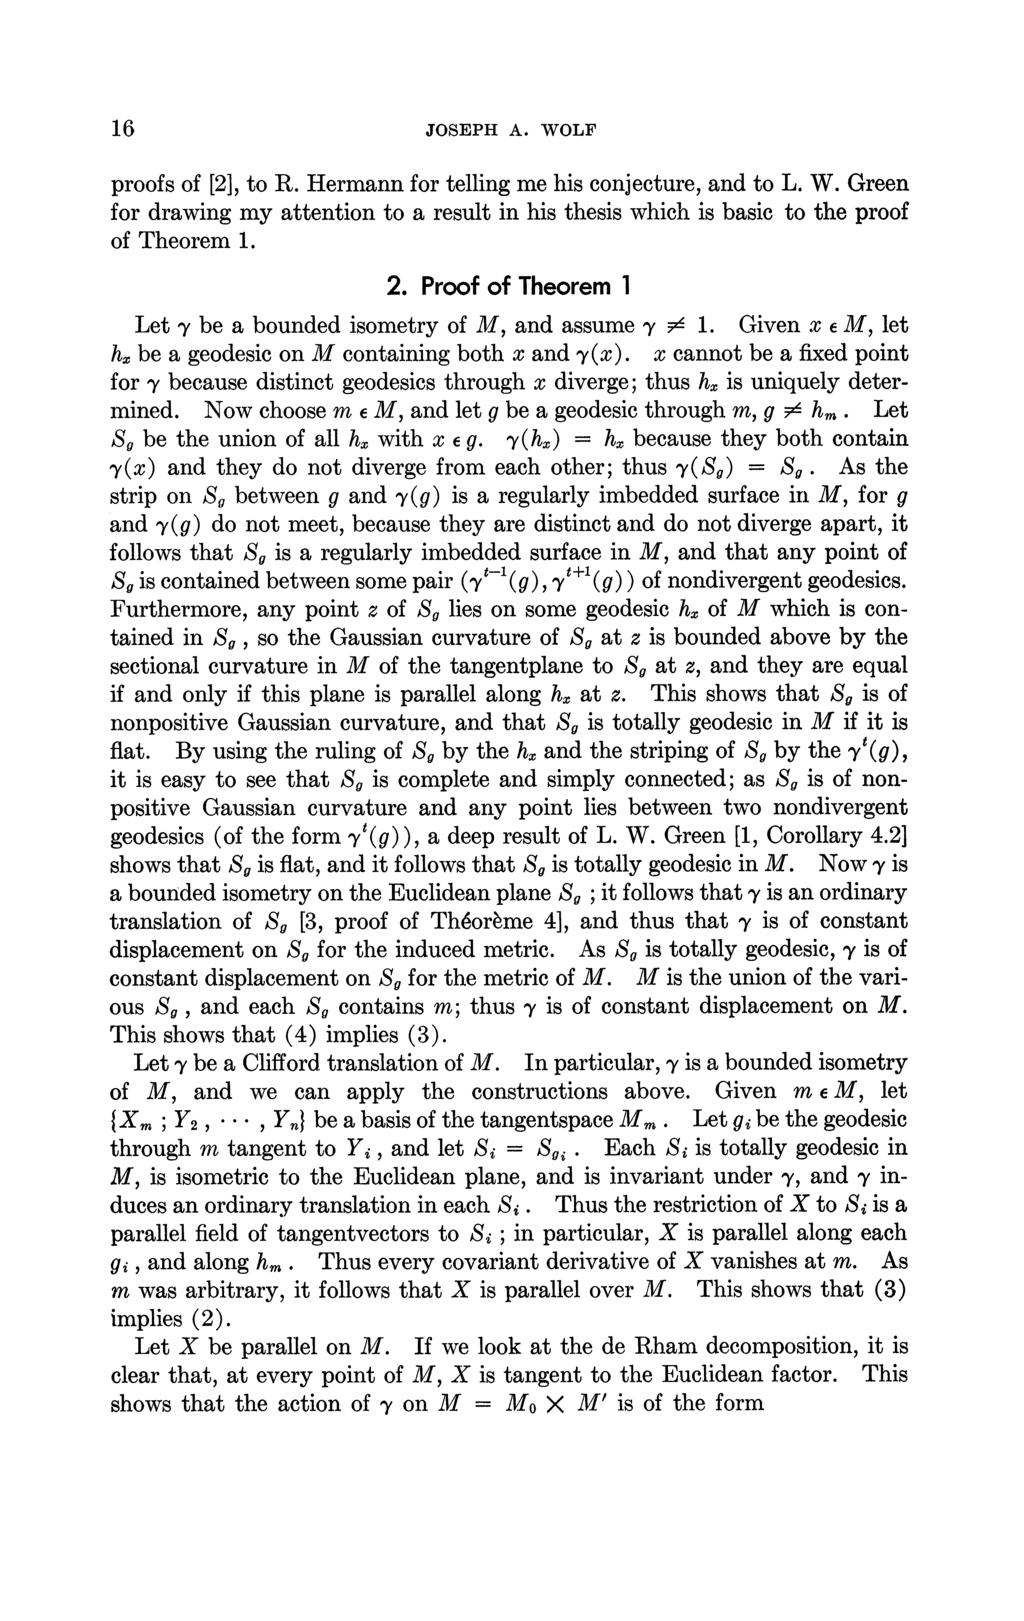 16 JOSEPH A. WOLF proofs of [2], to R. Hermann for telling me his conjecture, and to L. W. Green for drawing my attention to a result in his thesis which is basic to the proof of Theorem 1. 2.